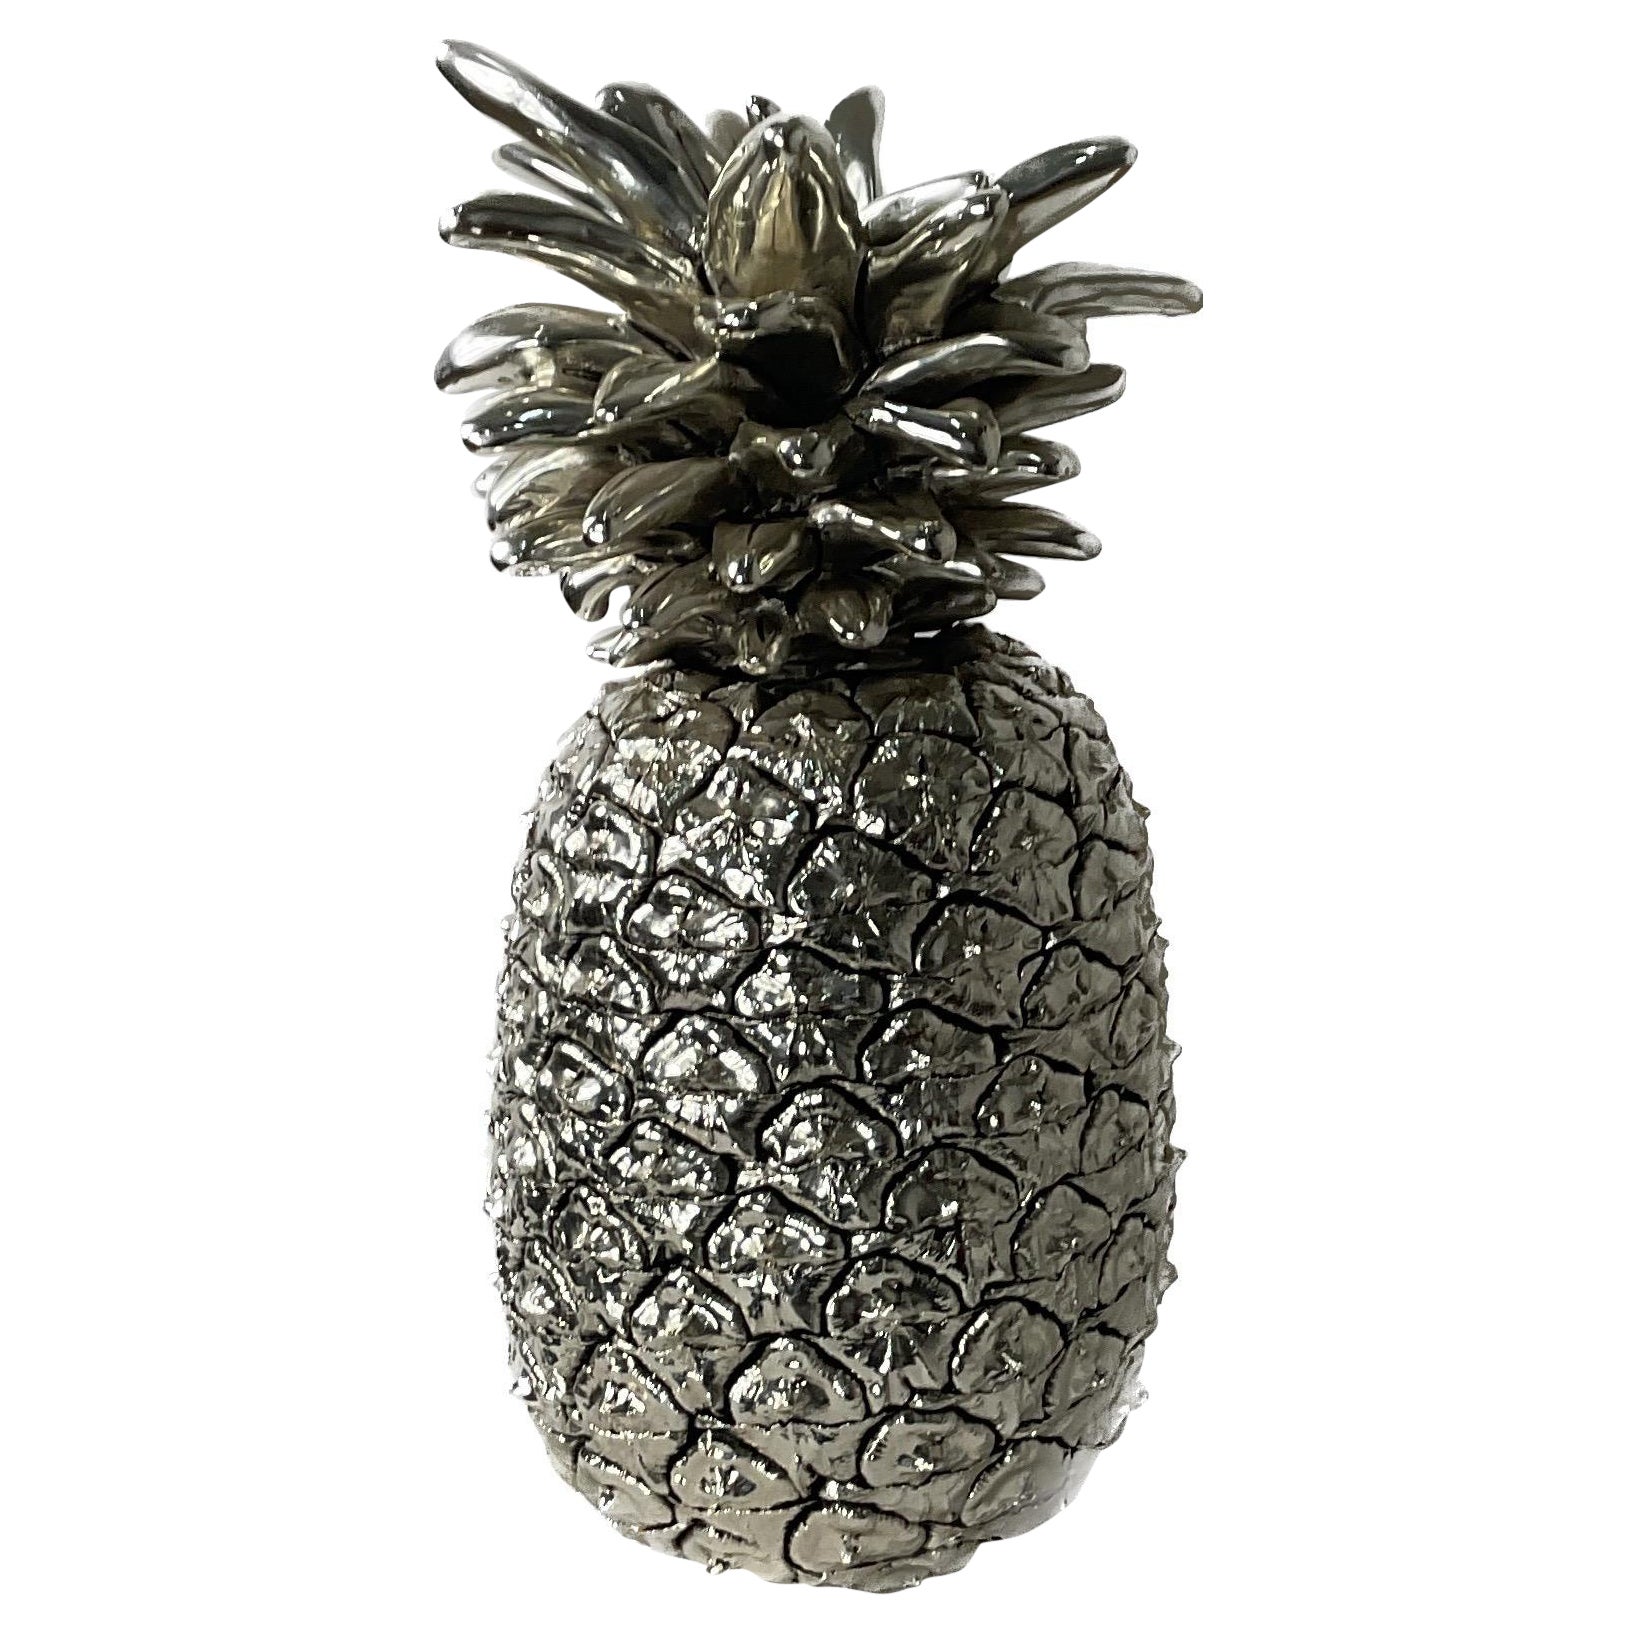 Marcello Giorgio's Silver Laminated Large Italian Pineapple from the Middle